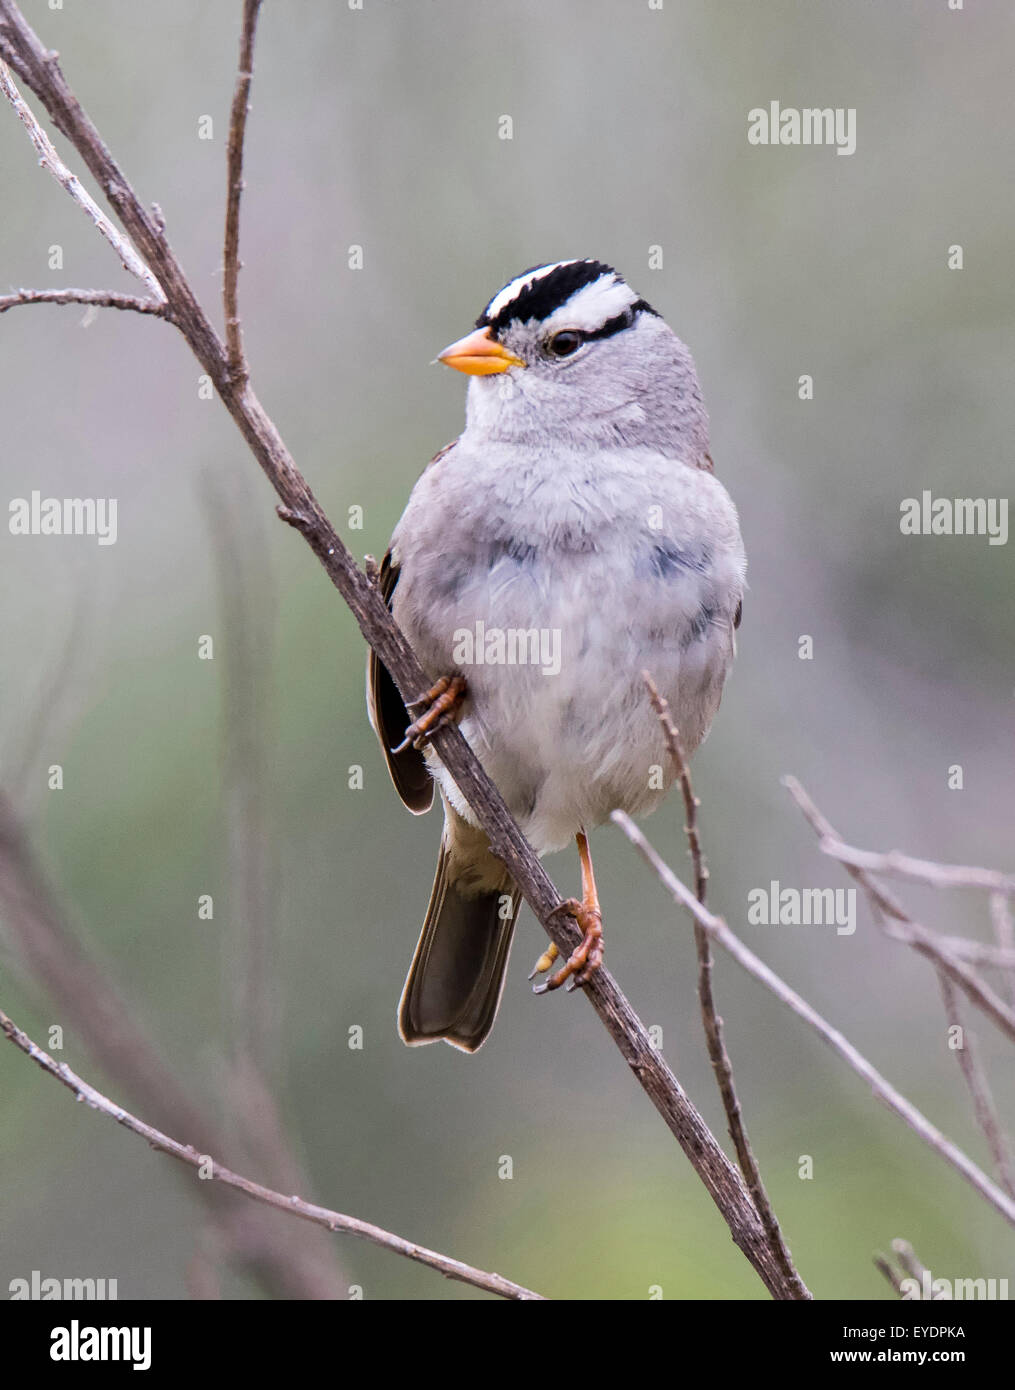 WHITE CROWN SPARROW (Zonotrichia leucophrys) perched branch in New Mexico Stock Photo